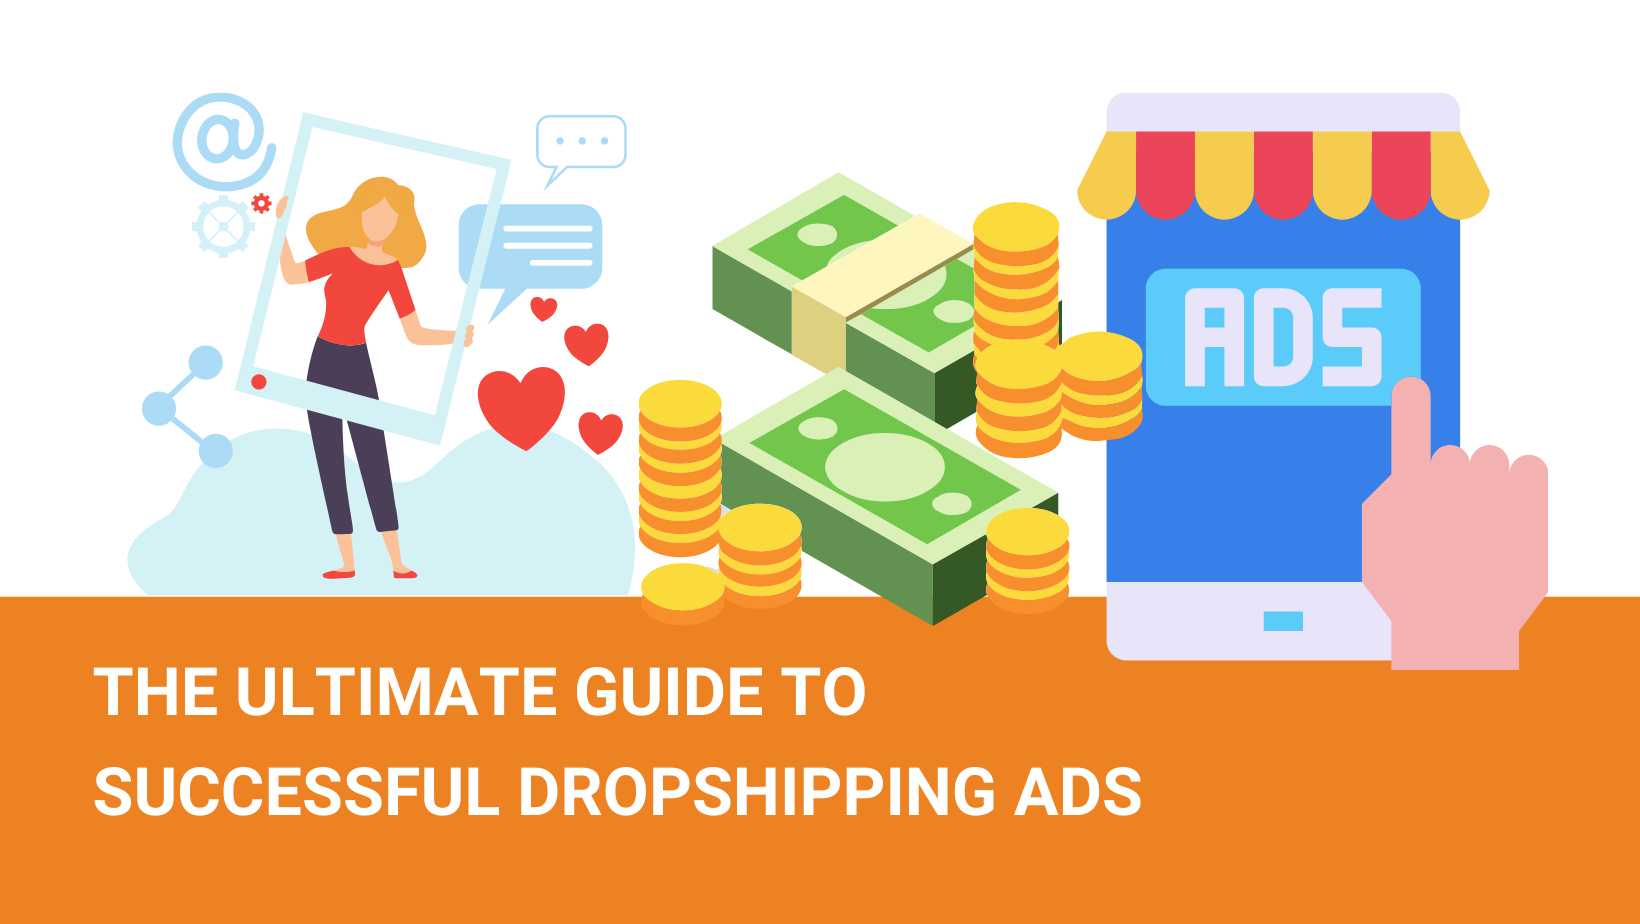 THE ULTIMATE GUIDE TO SUCCESSFUL DROPSHIPPING ADS